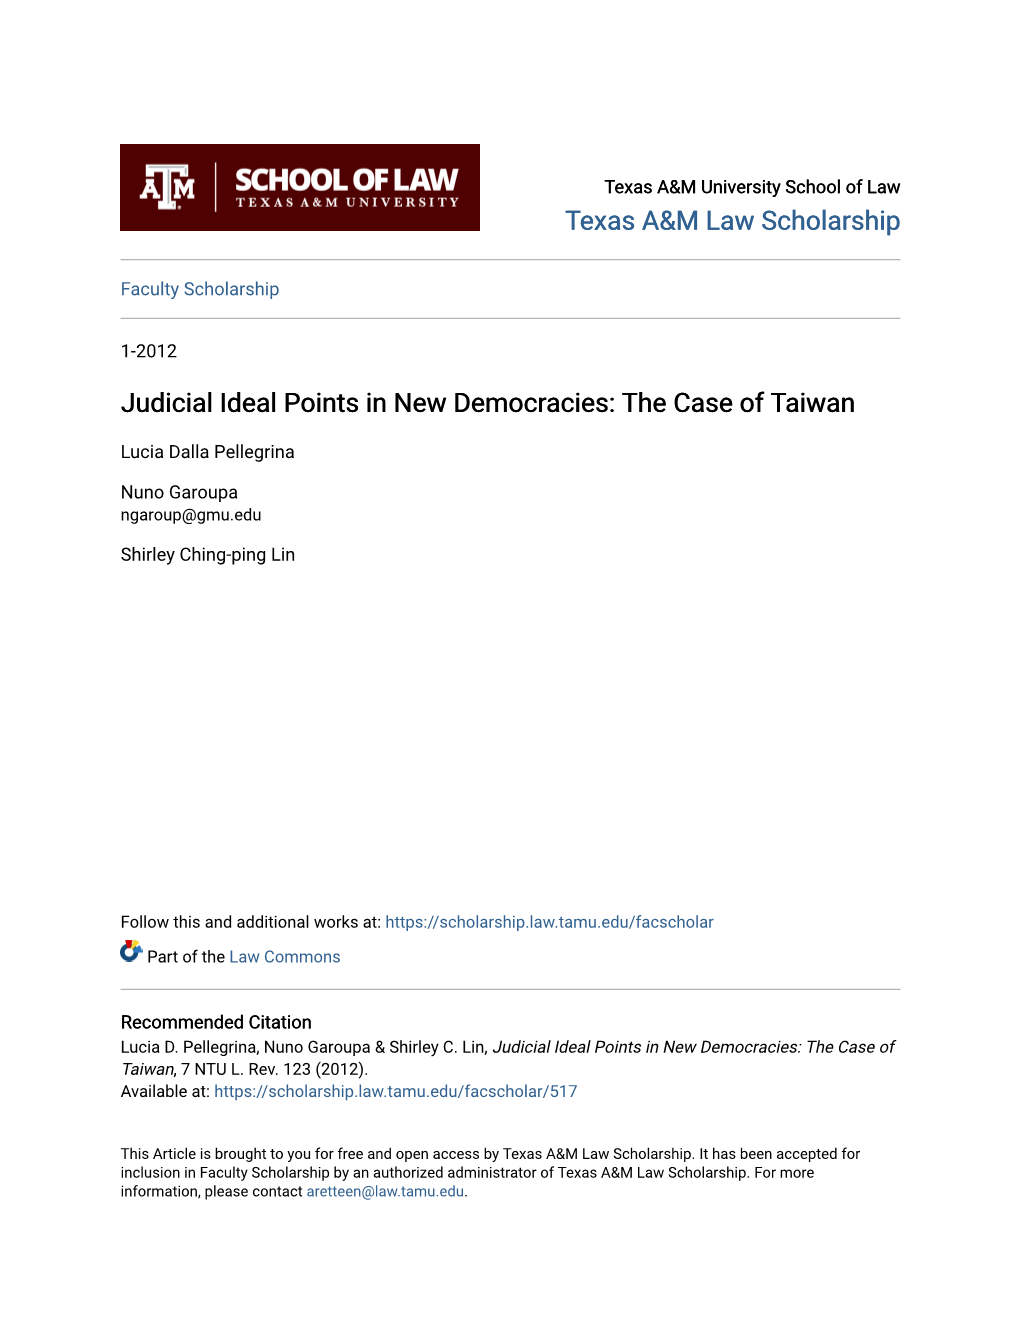 Judicial Ideal Points in New Democracies: the Case of Taiwan